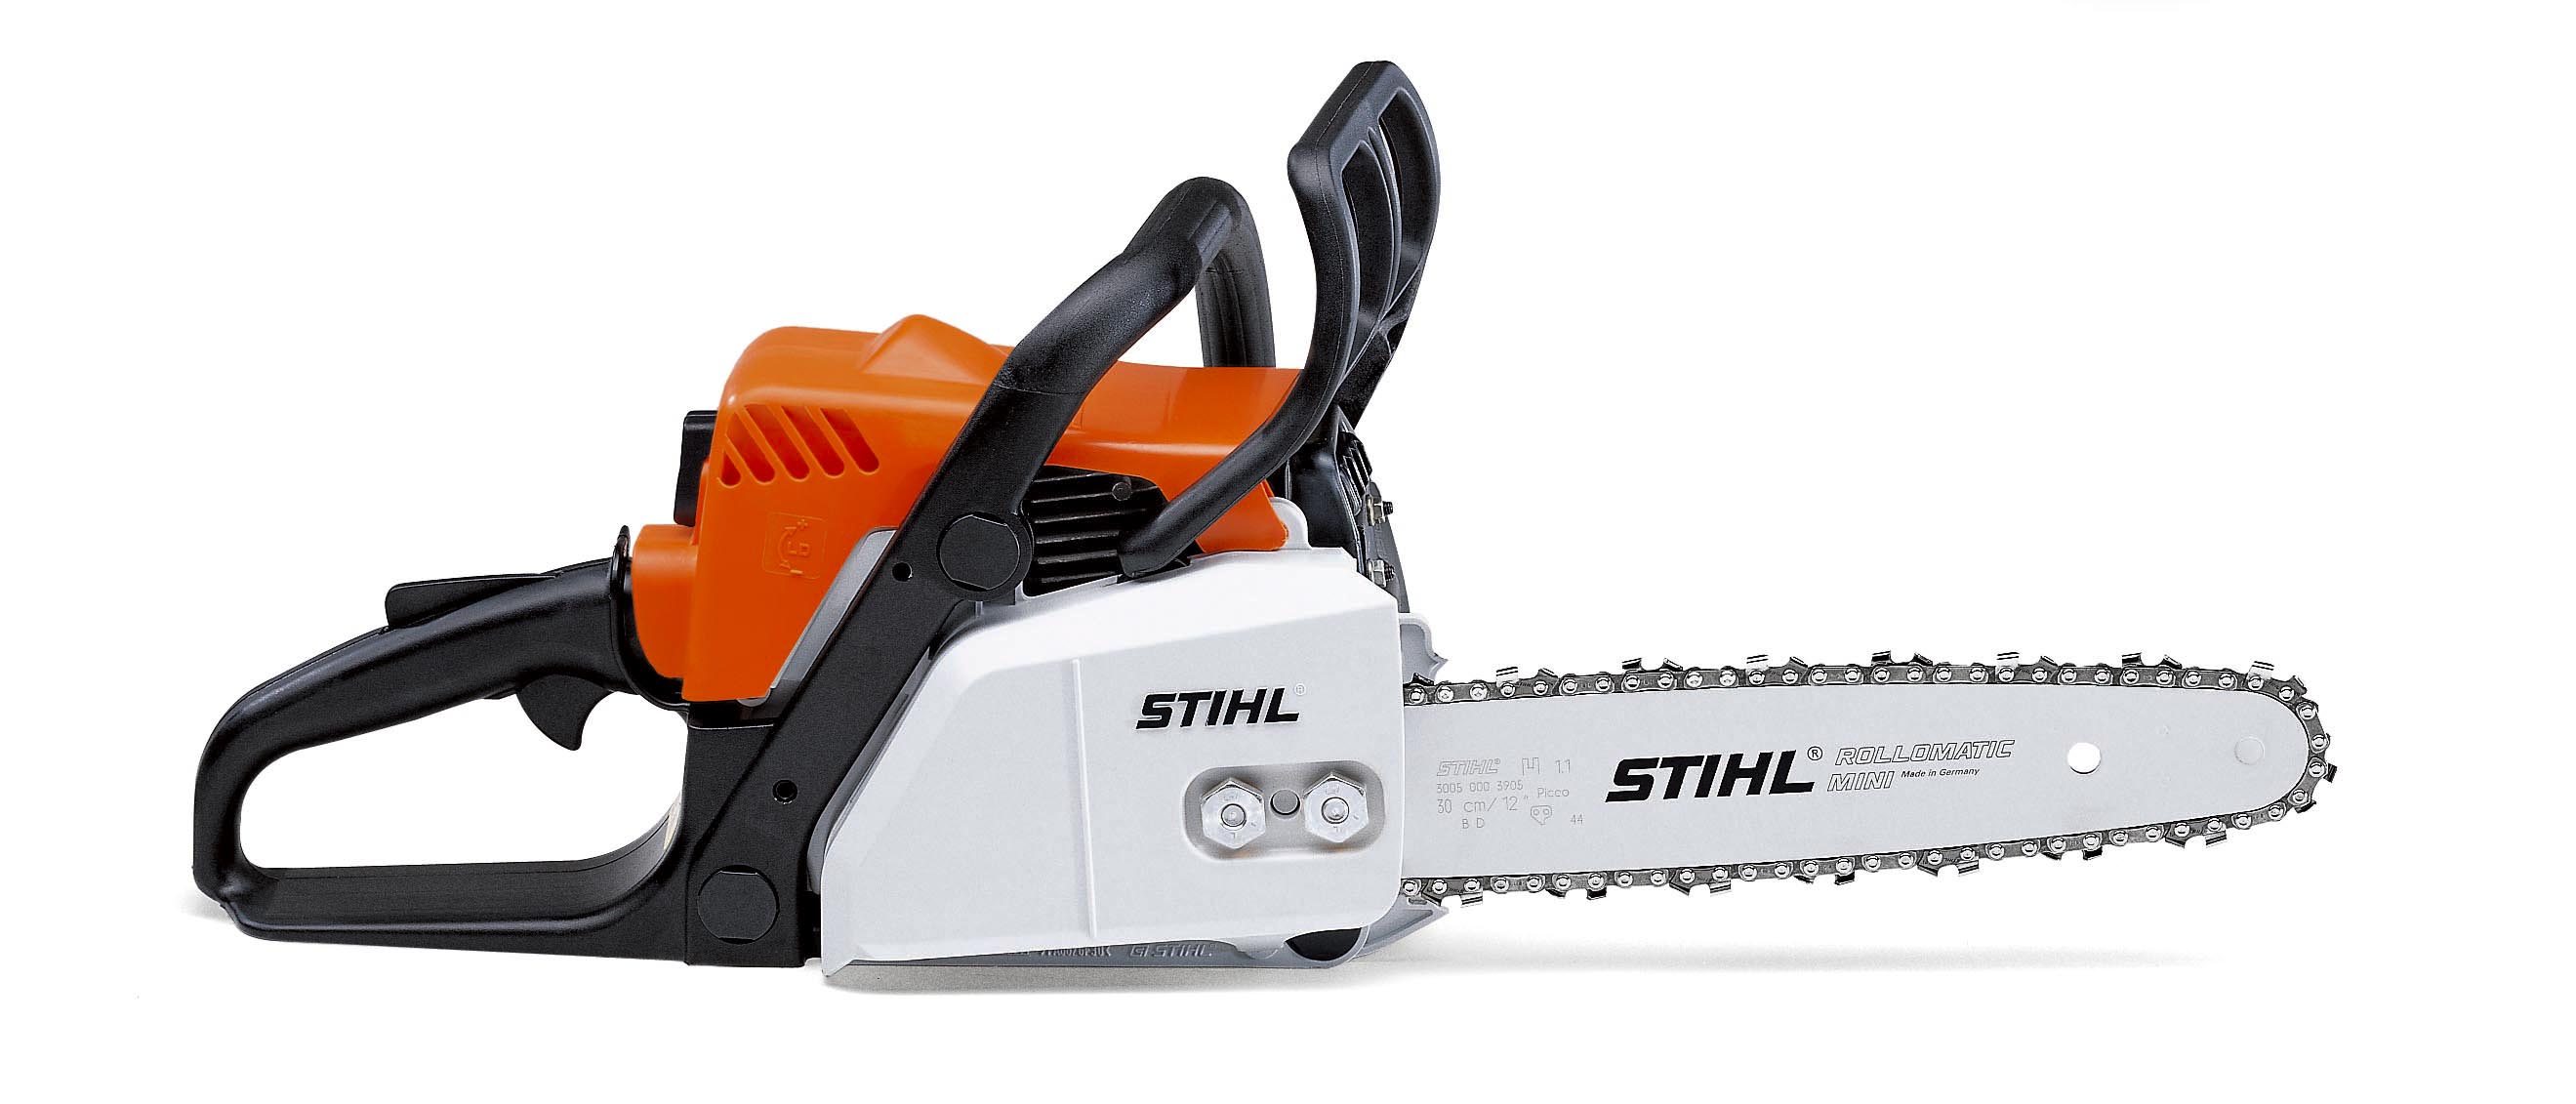 Stihl Ms 381 Benznl Testere HD Walls Find Wallpapers